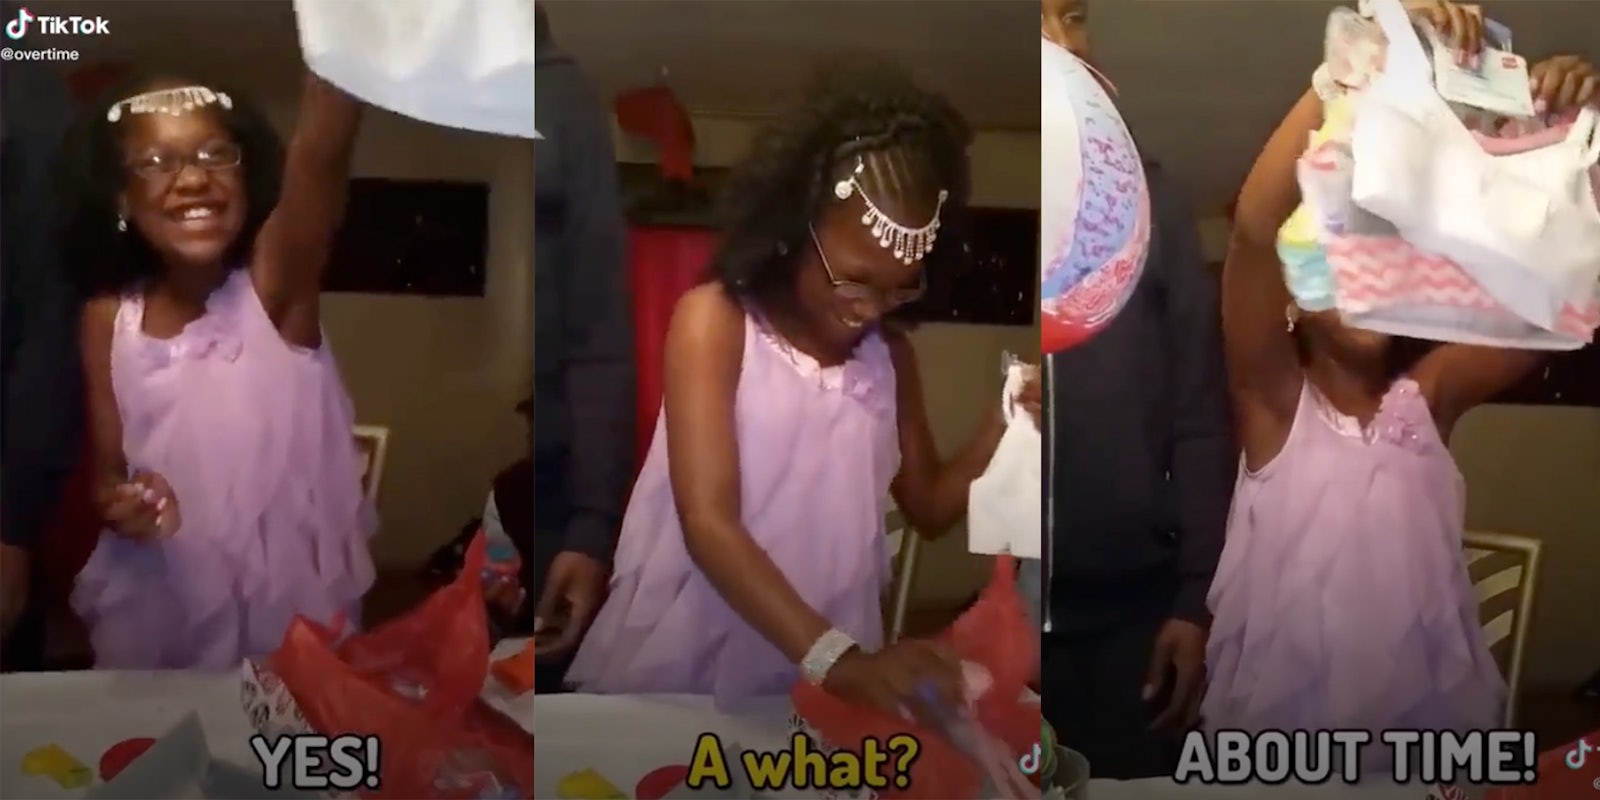 TikTok Shows Girl Schooling Adult After Getting Training Bra Gift